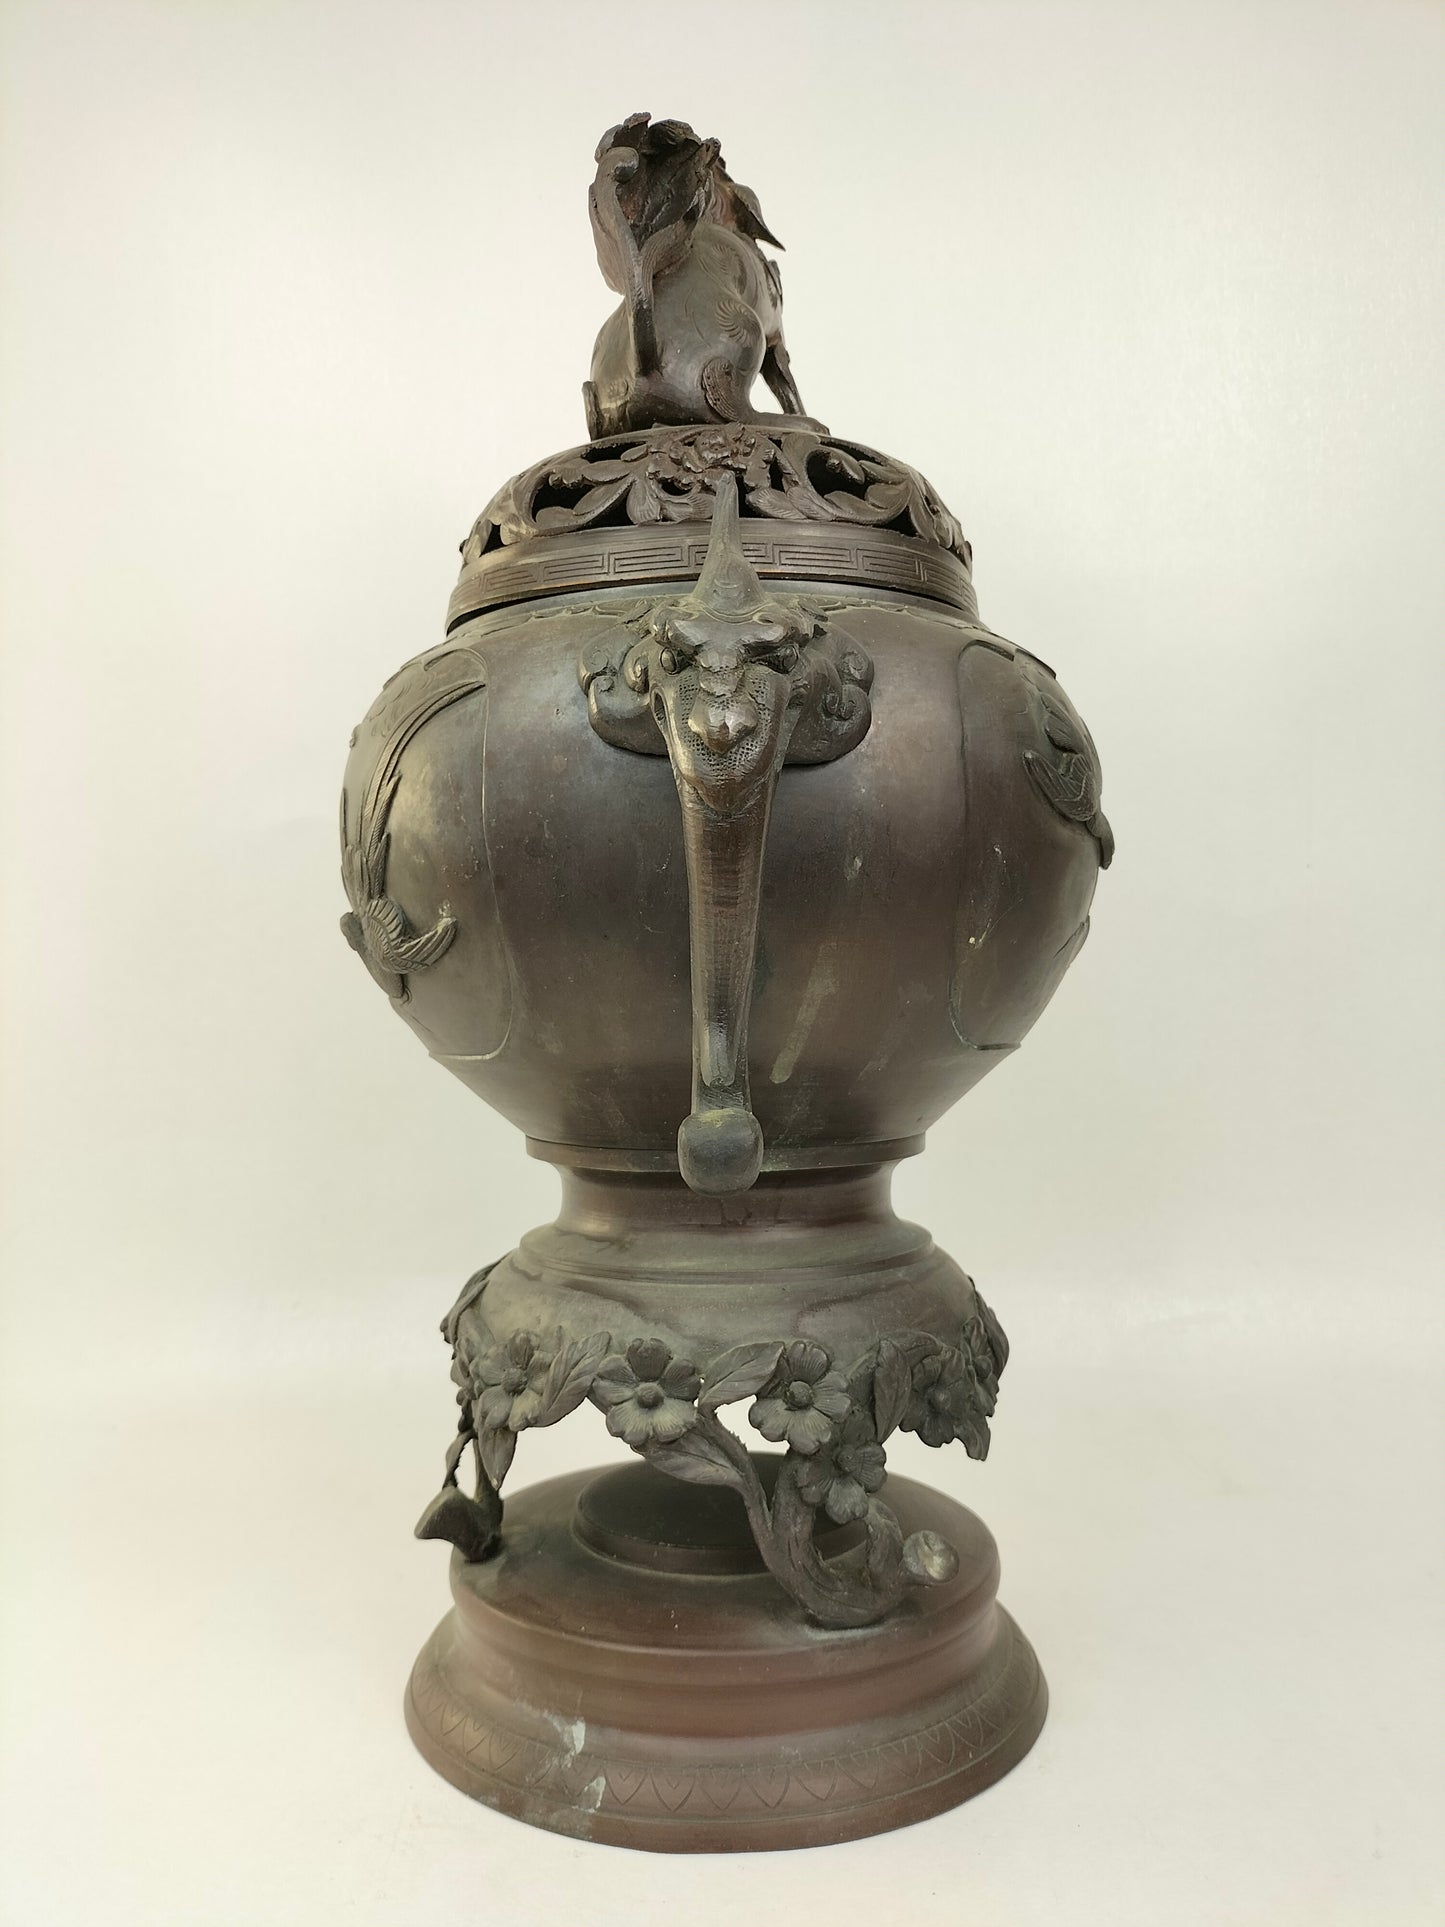 Large antique Japanese bronze incense burner decorated with birds and foo dog // Meiji Period - 19th century